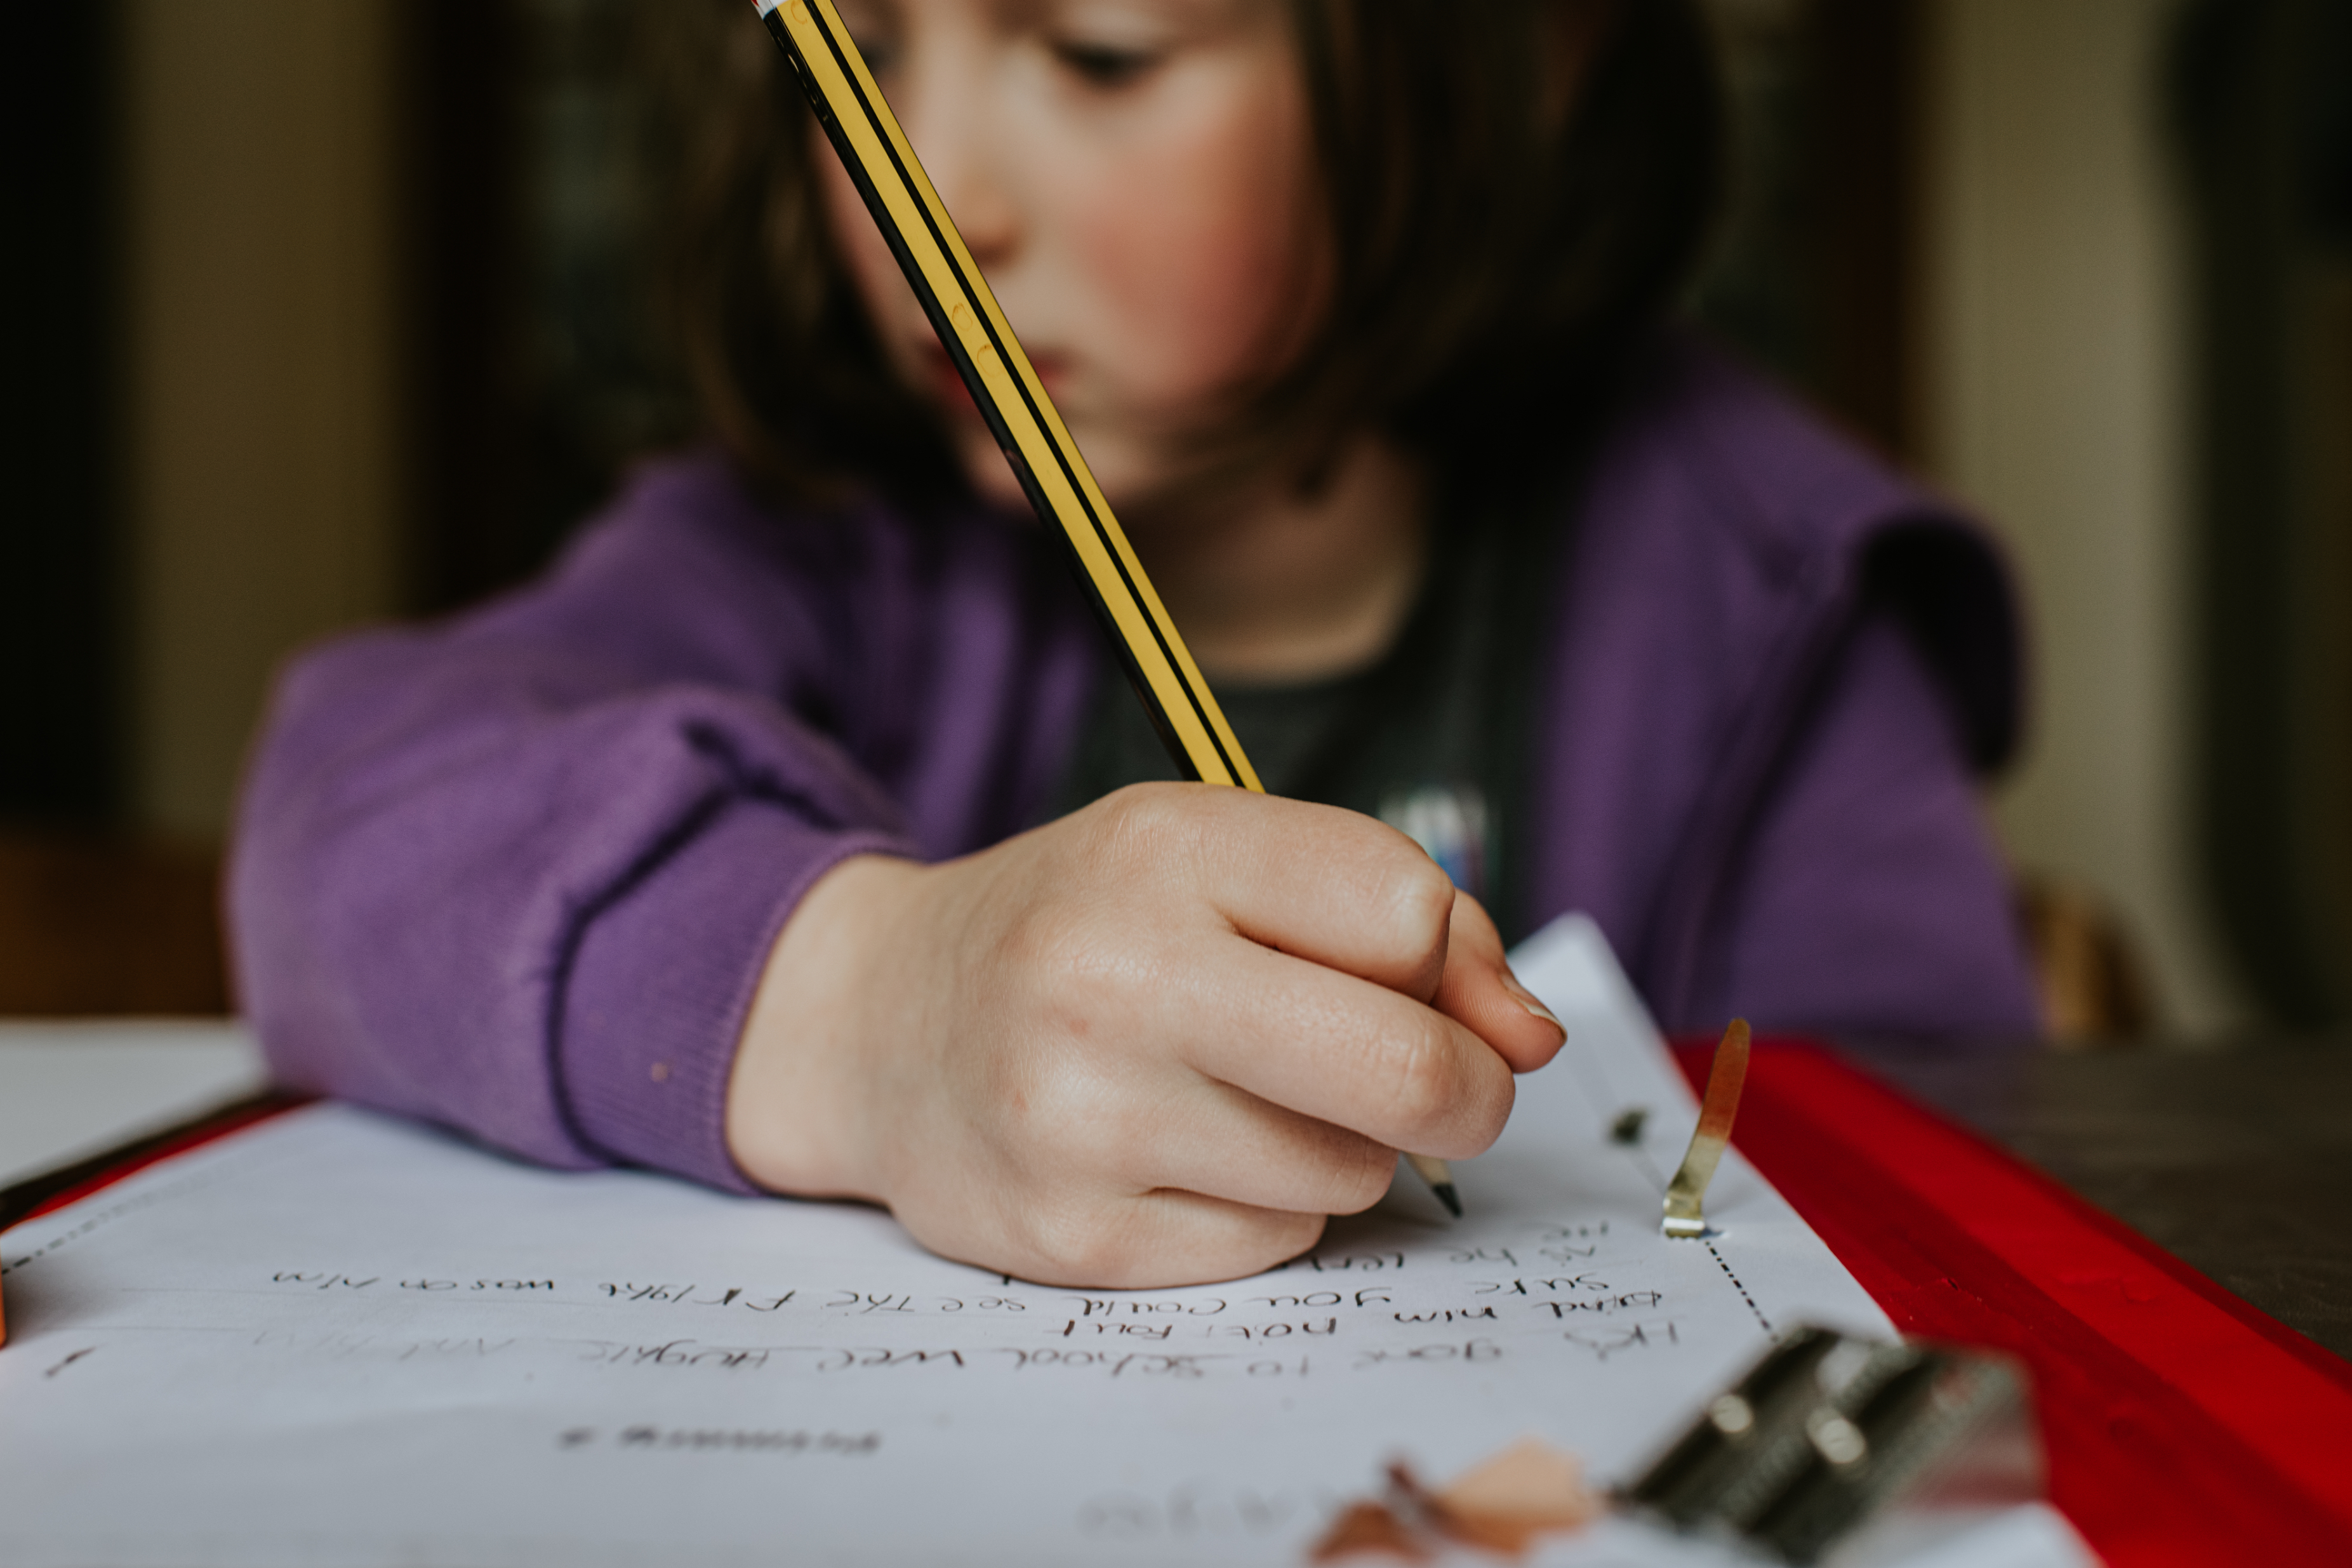 Child focused on writing with a pencil on paper, resting arm on the table